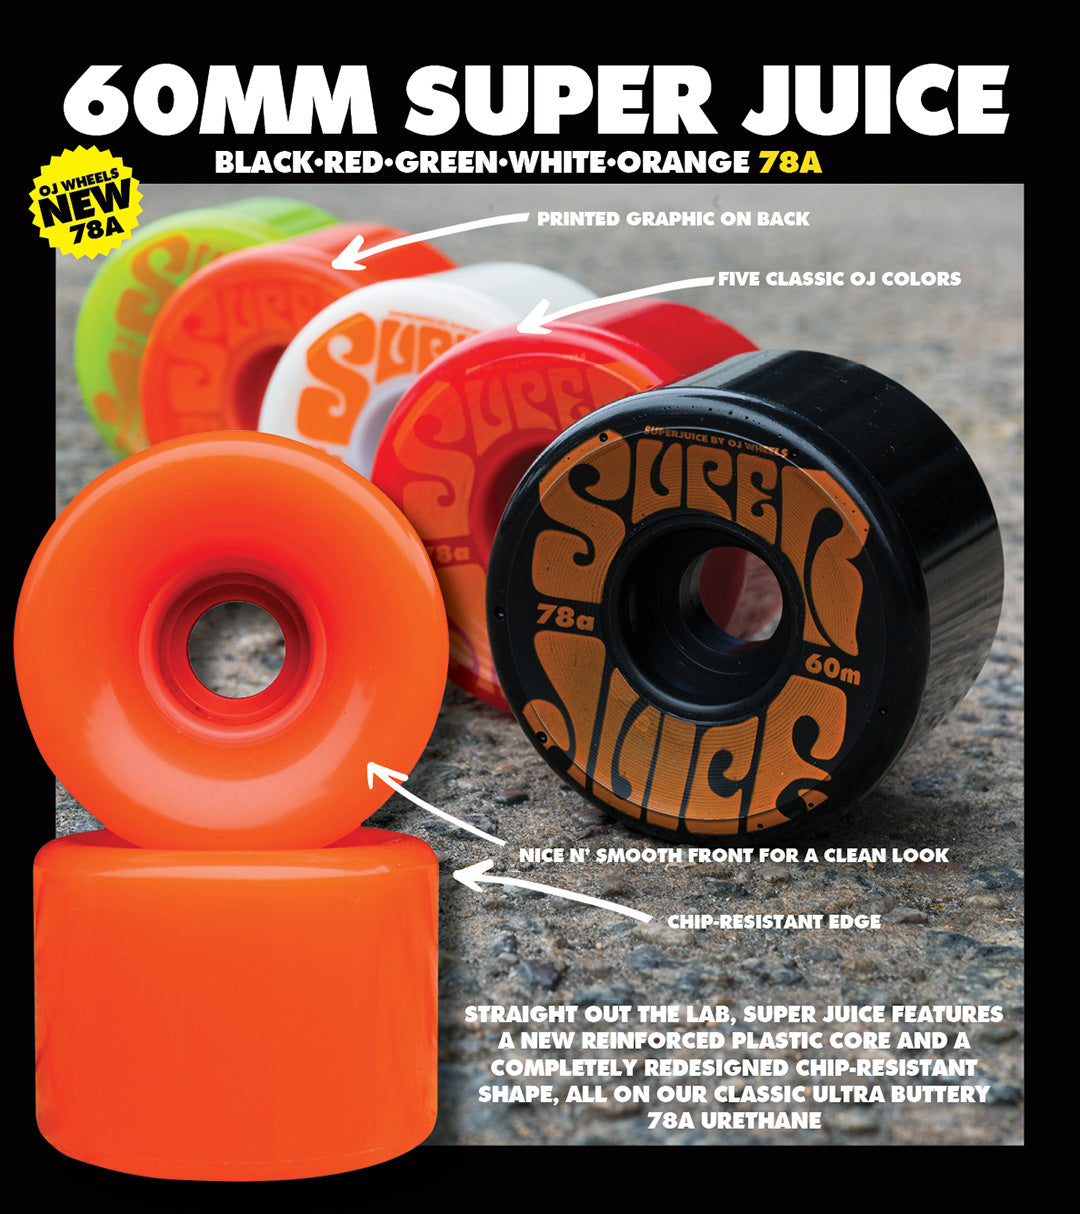 Super Juice 78a Wheels 60mm (color options listed)